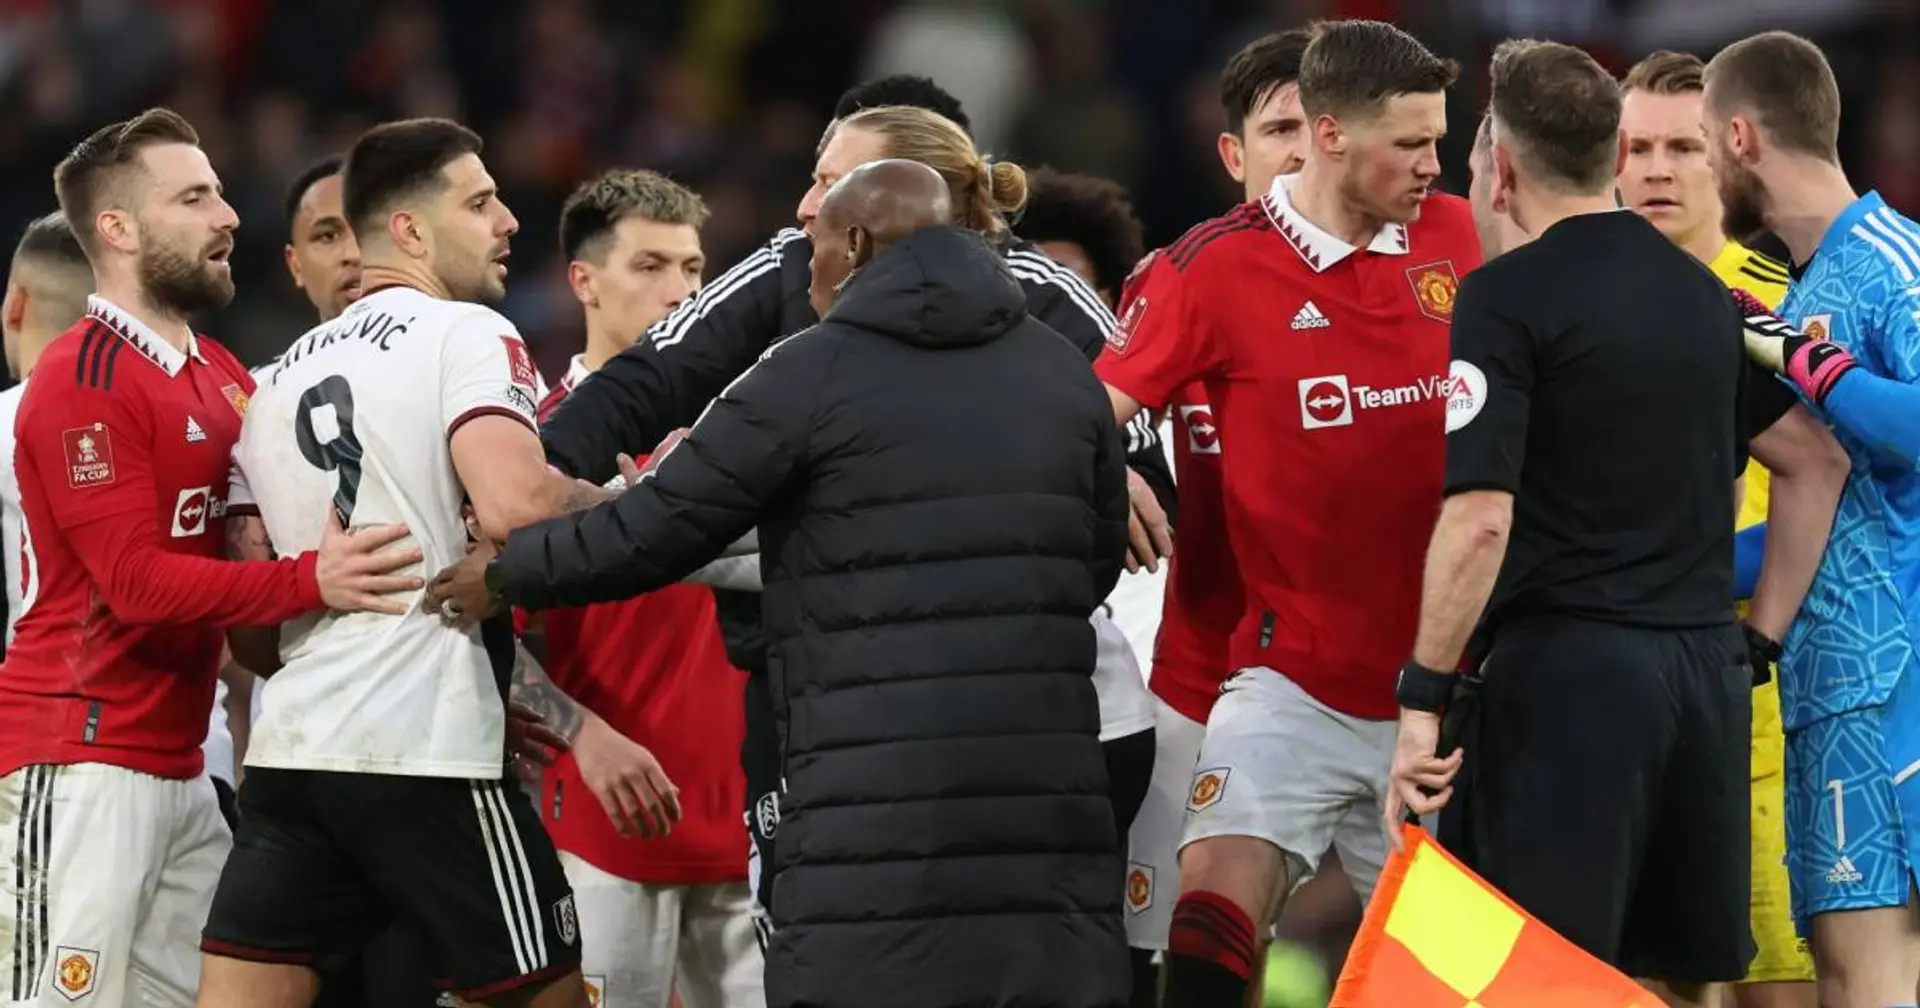 Man United charged by FA for surrounding referee vs Fulham — fifth time in 2022/23